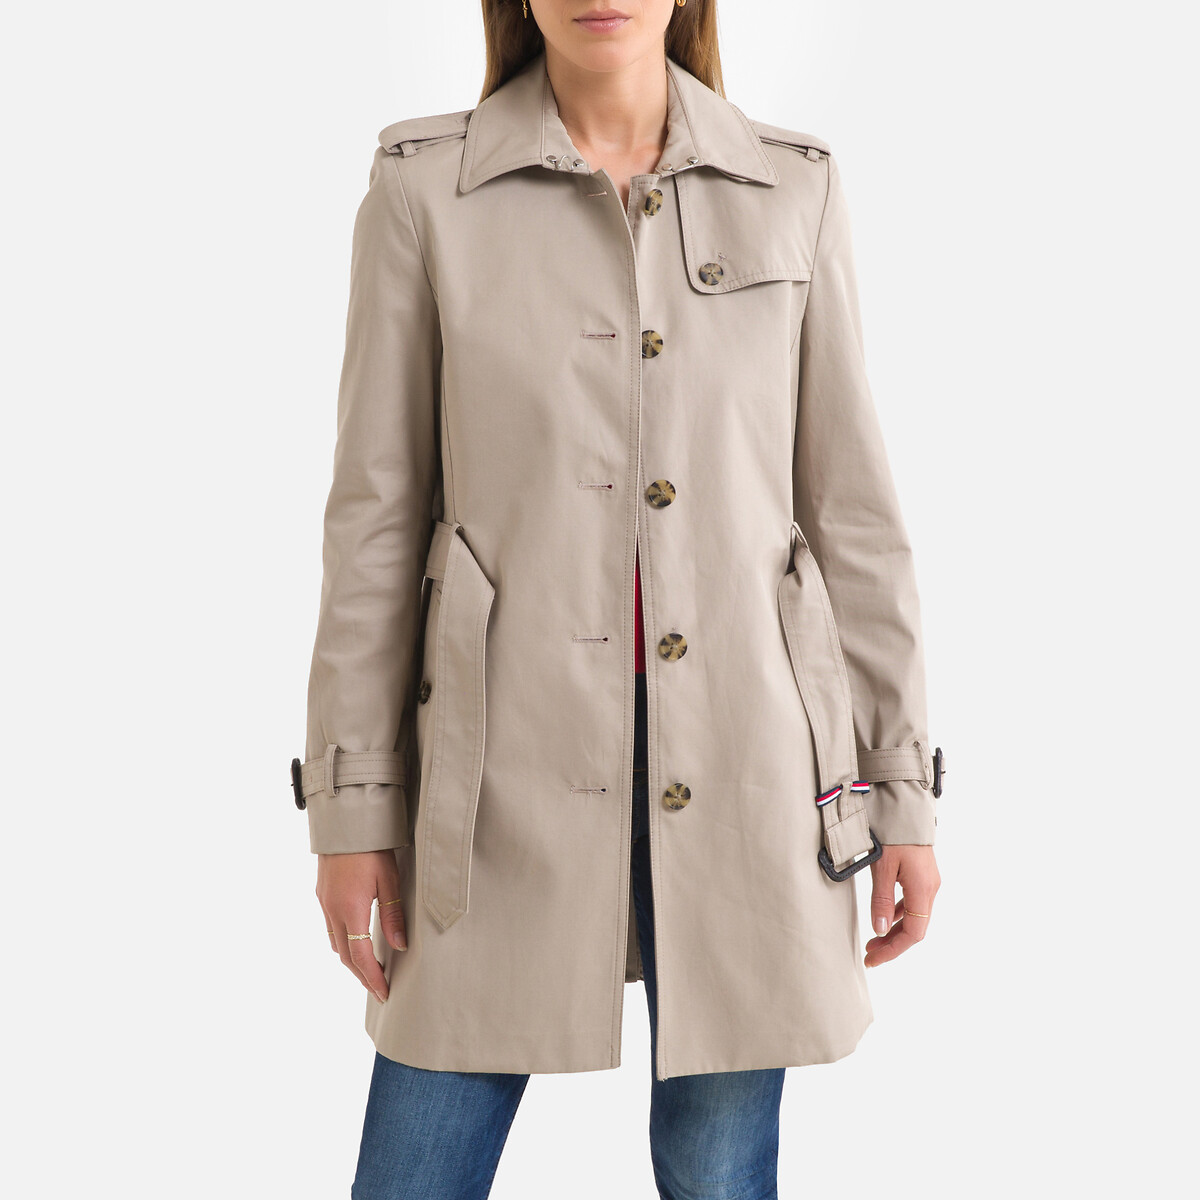 Cotton Belted Trench Coat, Mid-Length